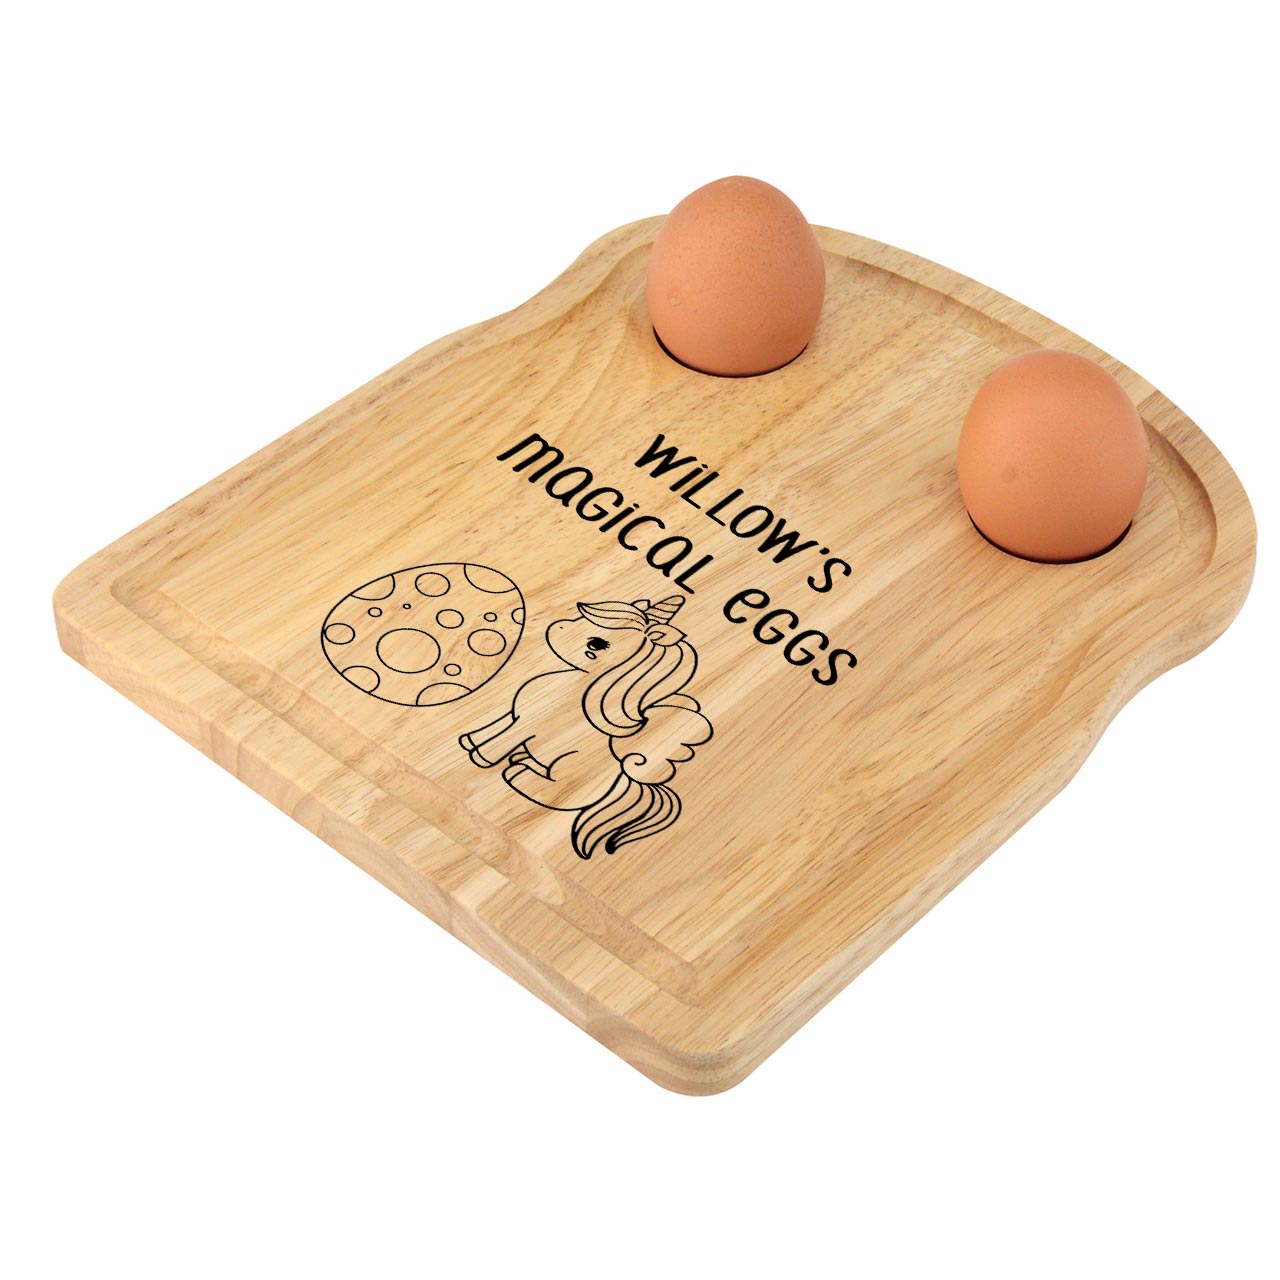 Wooden Loaf Egg Board with unicorn personalised